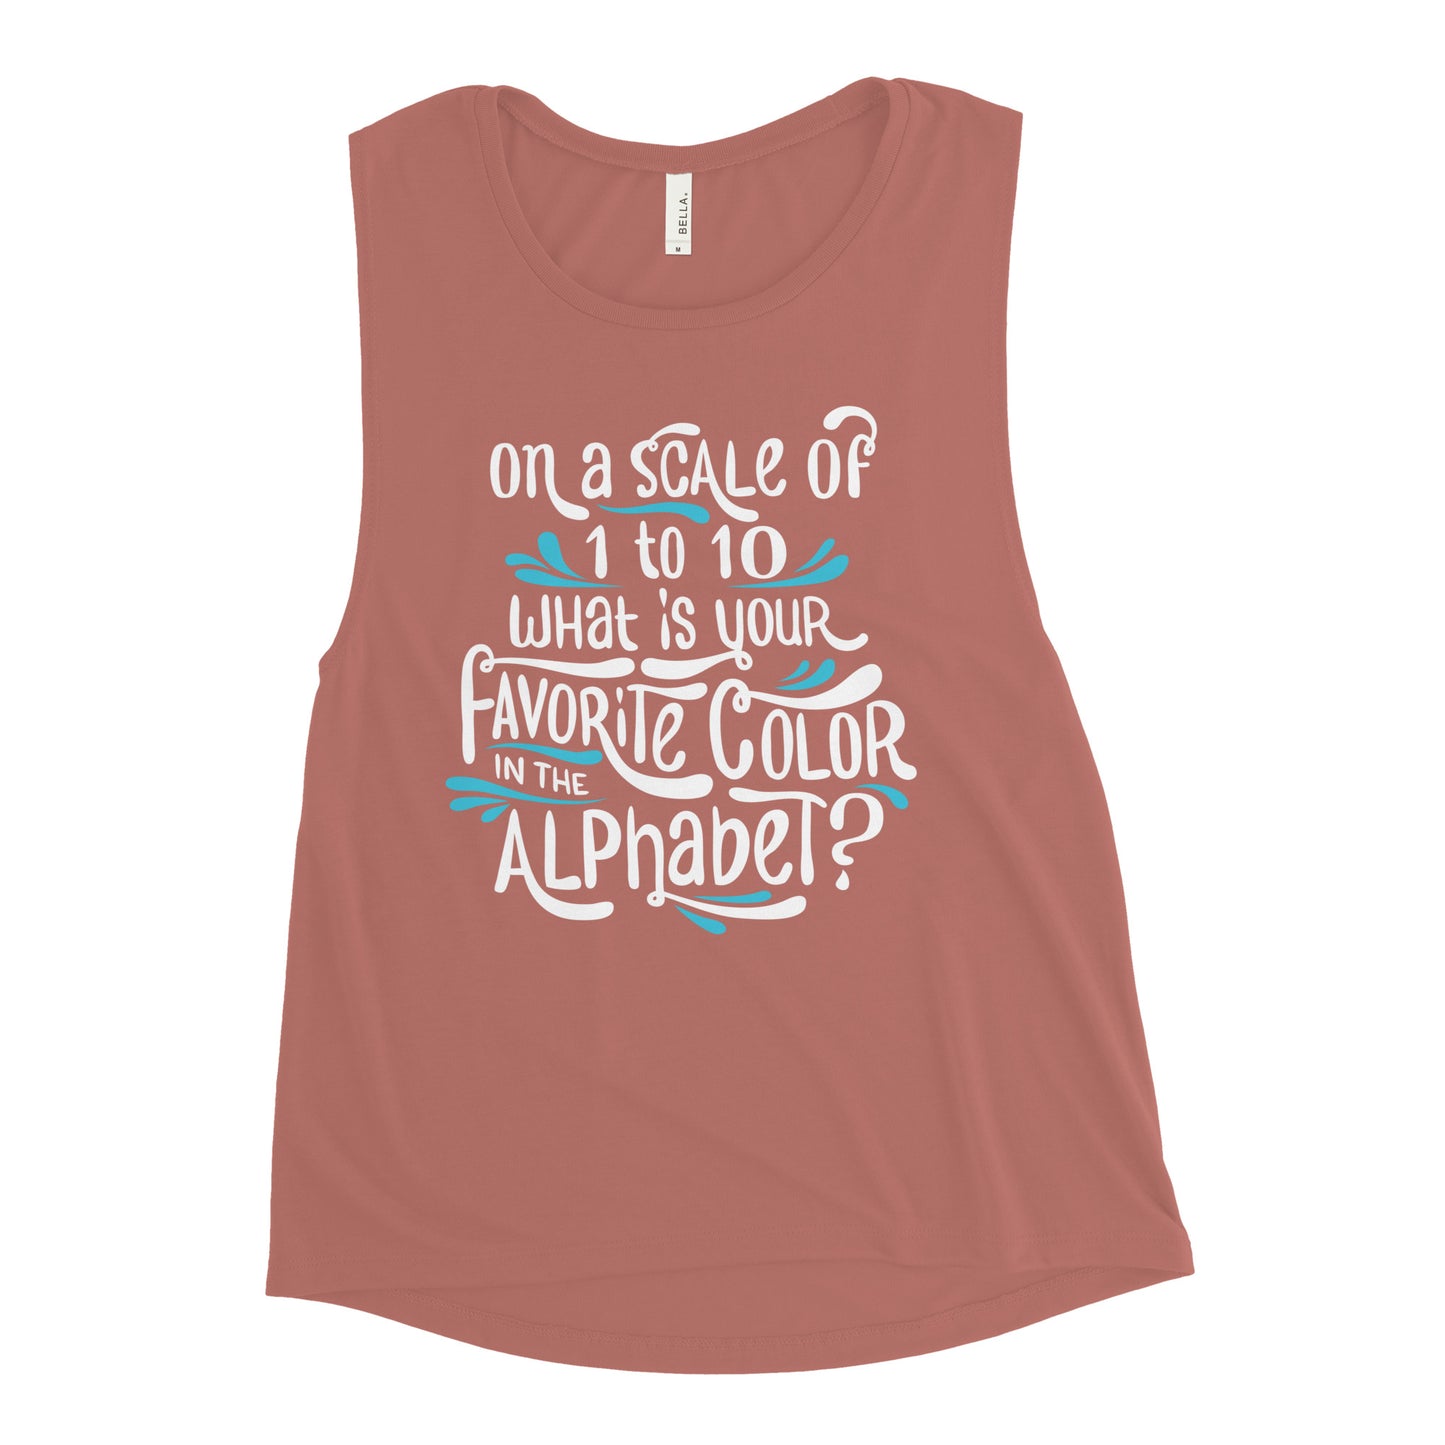 Favorite Color In The Alphabet Women's Muscle Tank